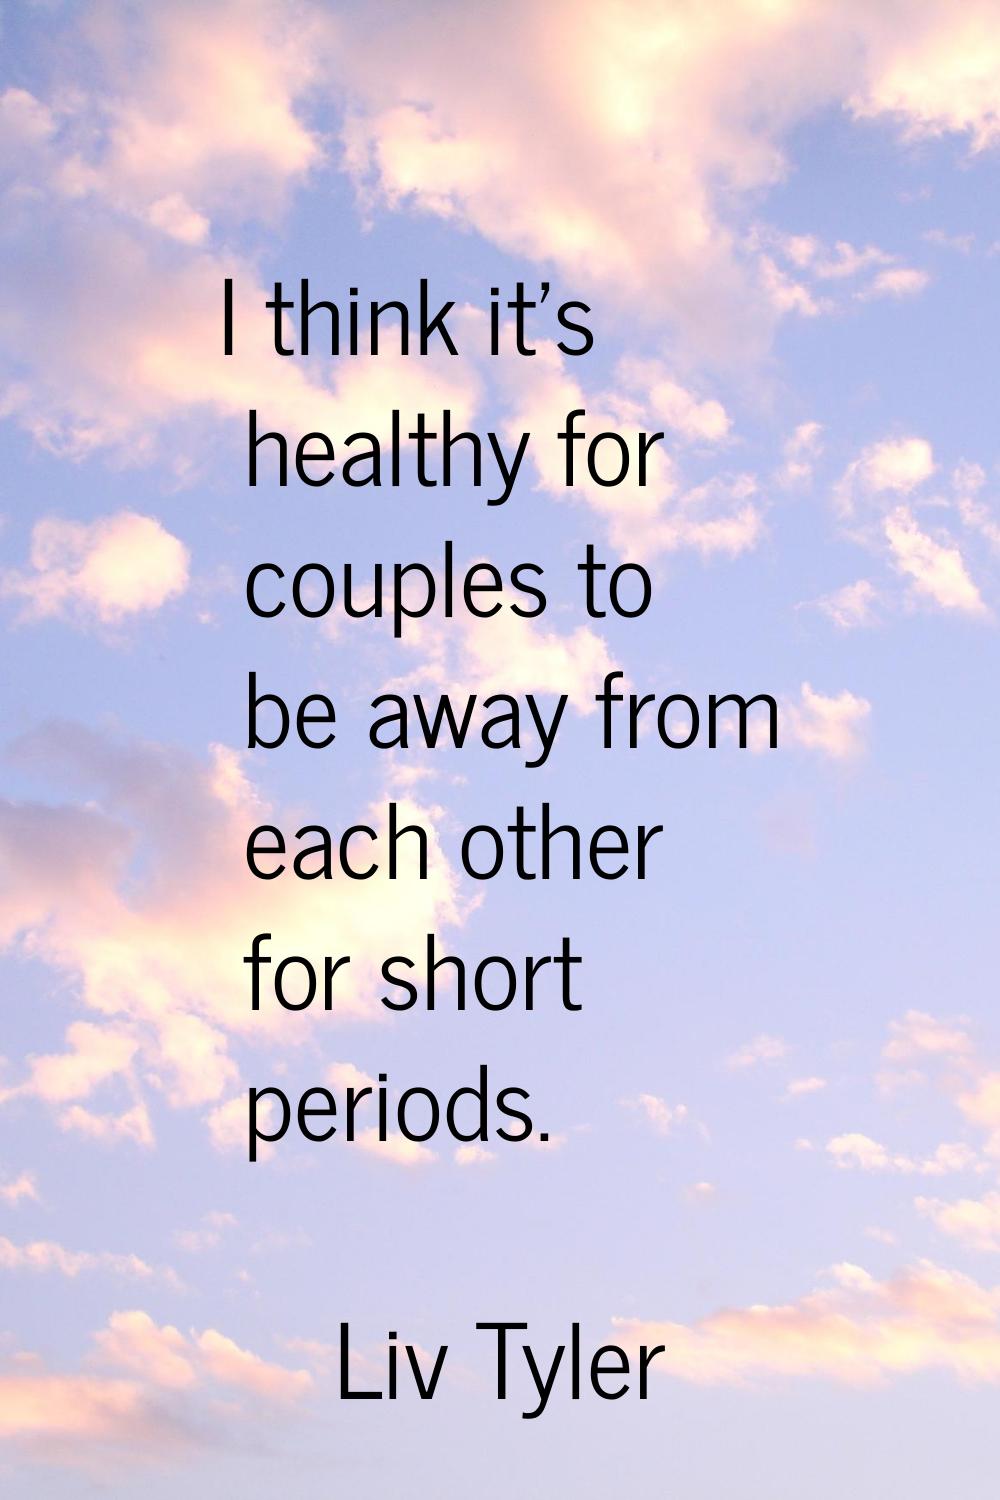 I think it's healthy for couples to be away from each other for short periods.